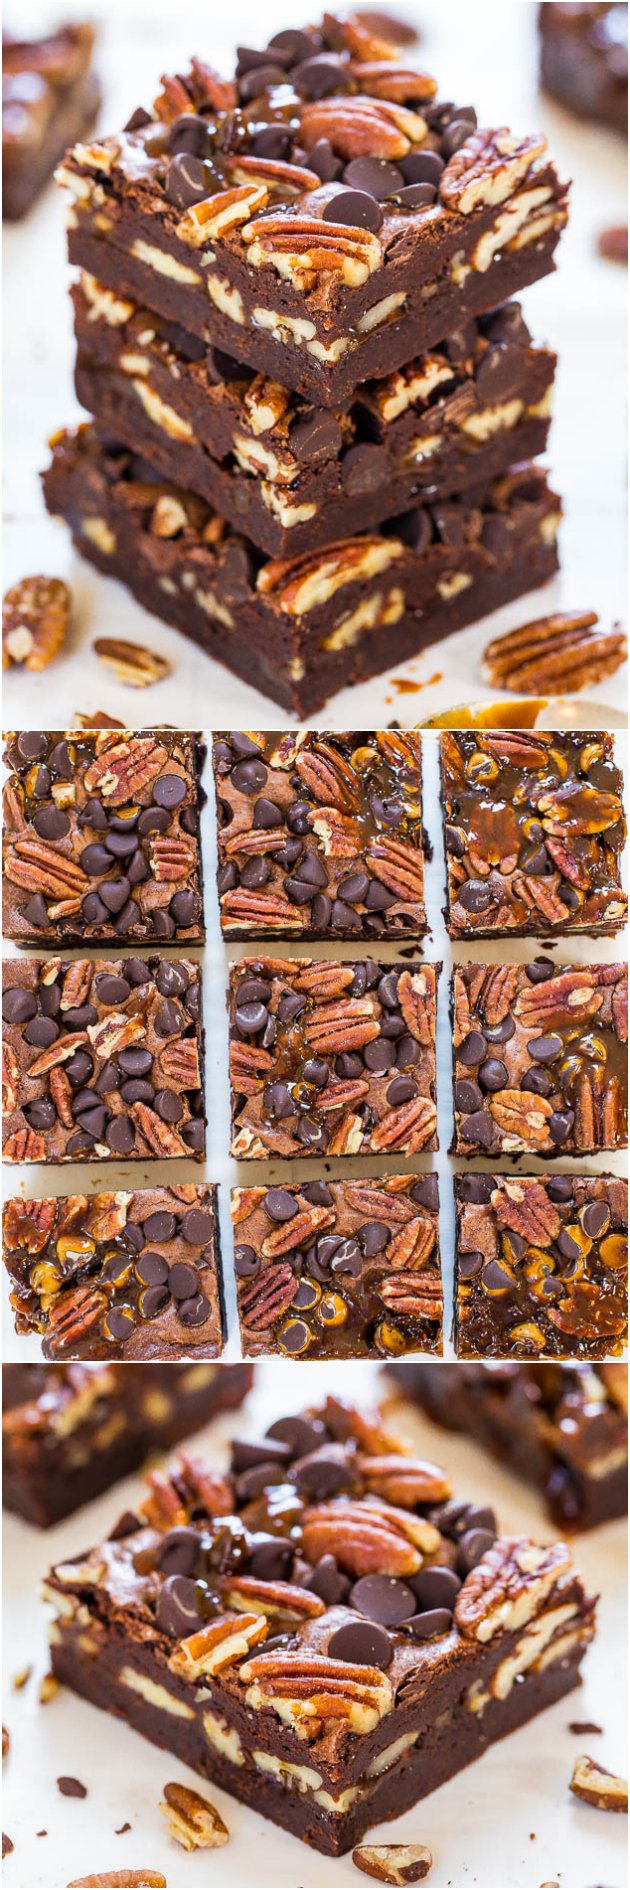 The Best Turtle Brownies - Super fudgy and loaded with chocolate, pecans and caramel! So.crazy.good!!!